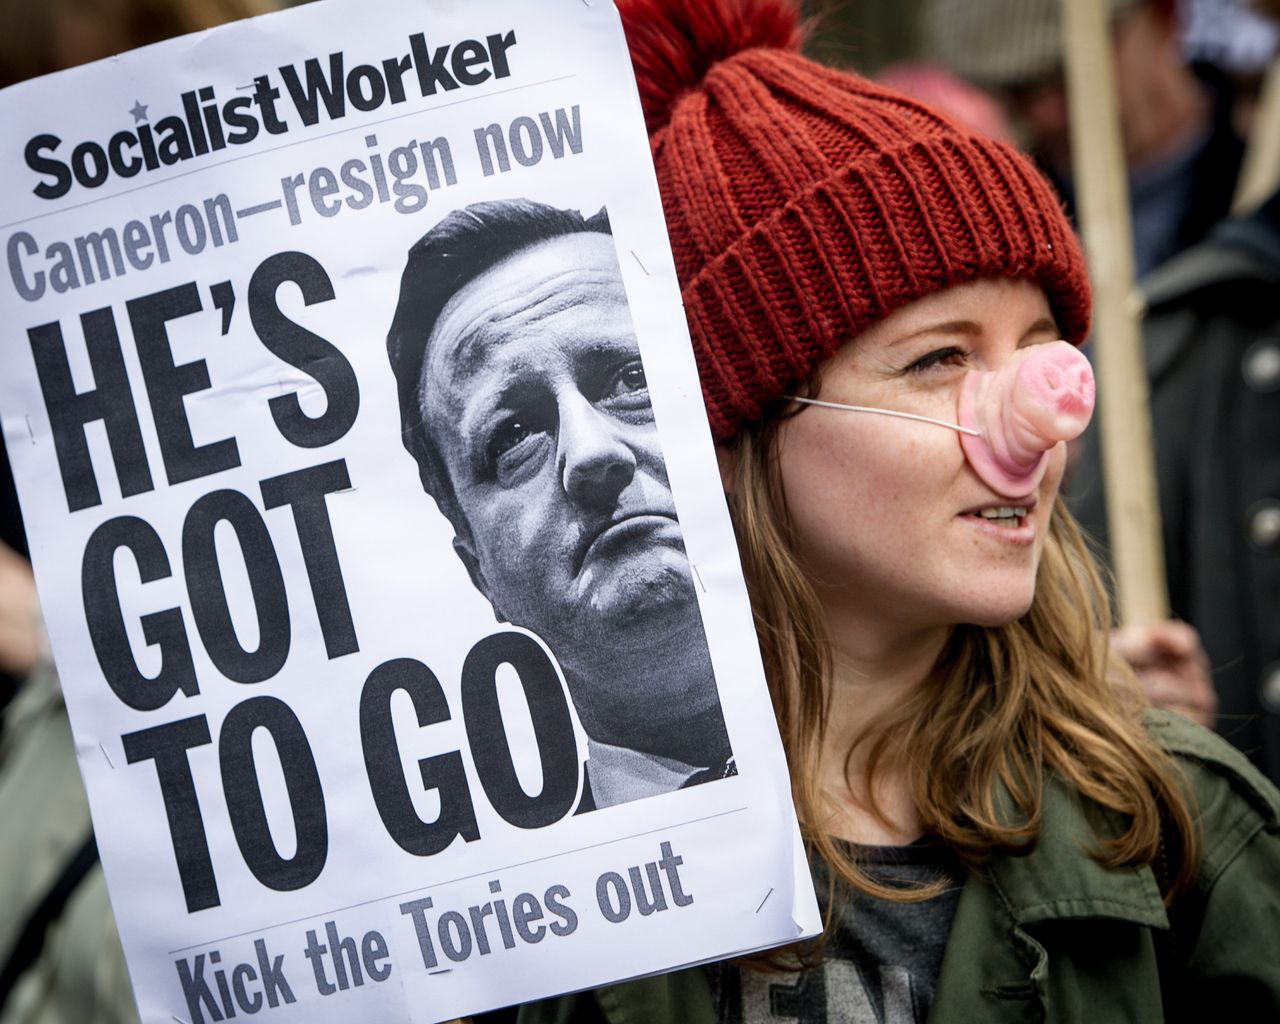 'He's Got To Go' placard held by a protestor wearing a pig's nose